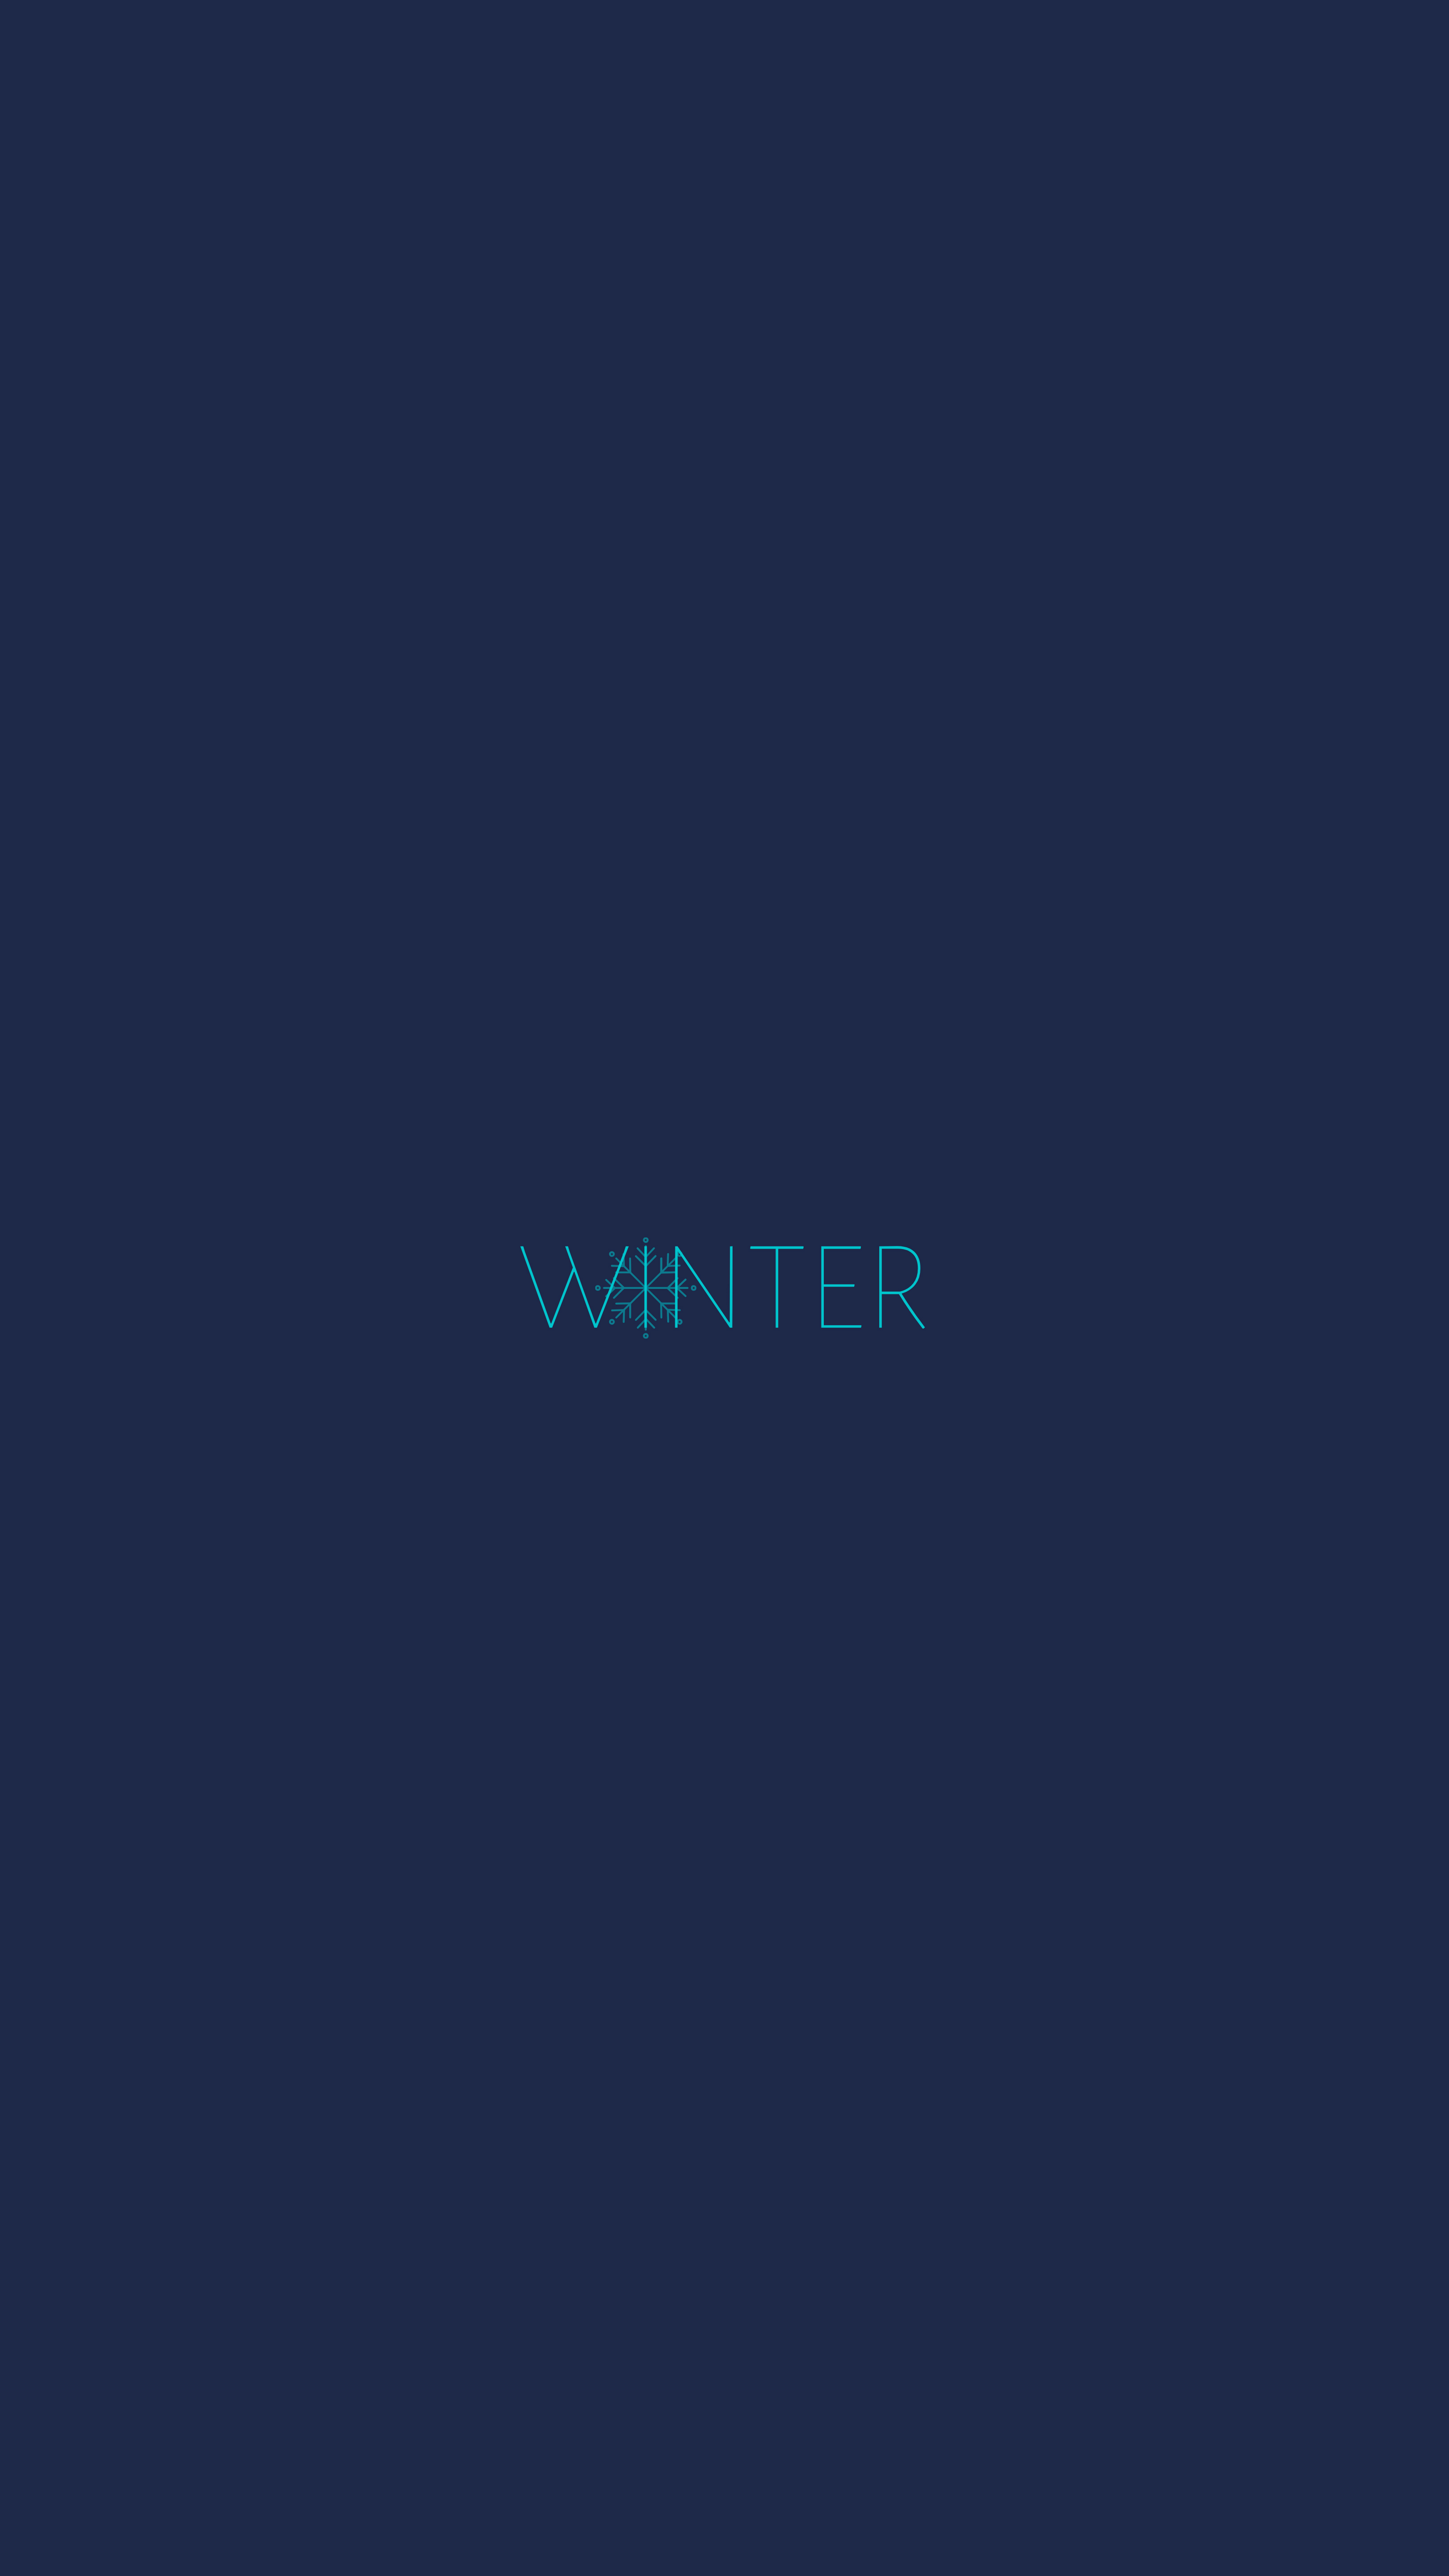 winter, words, inscription, word, snowflake wallpaper for mobile